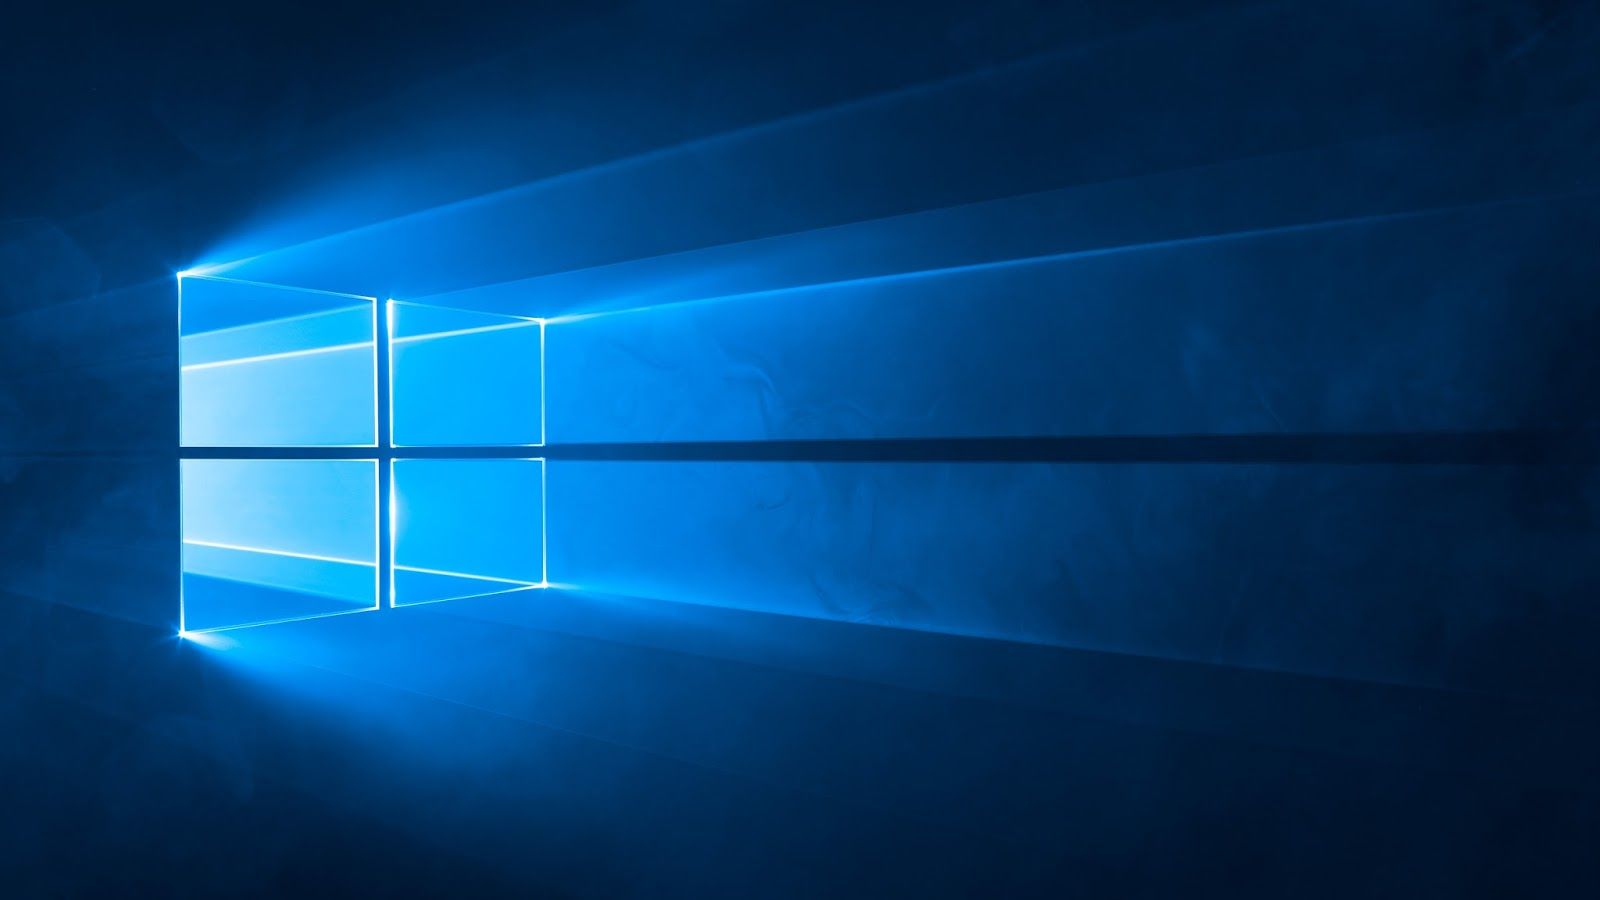 Windows 10 Default Backgrounds posted by John Mercado